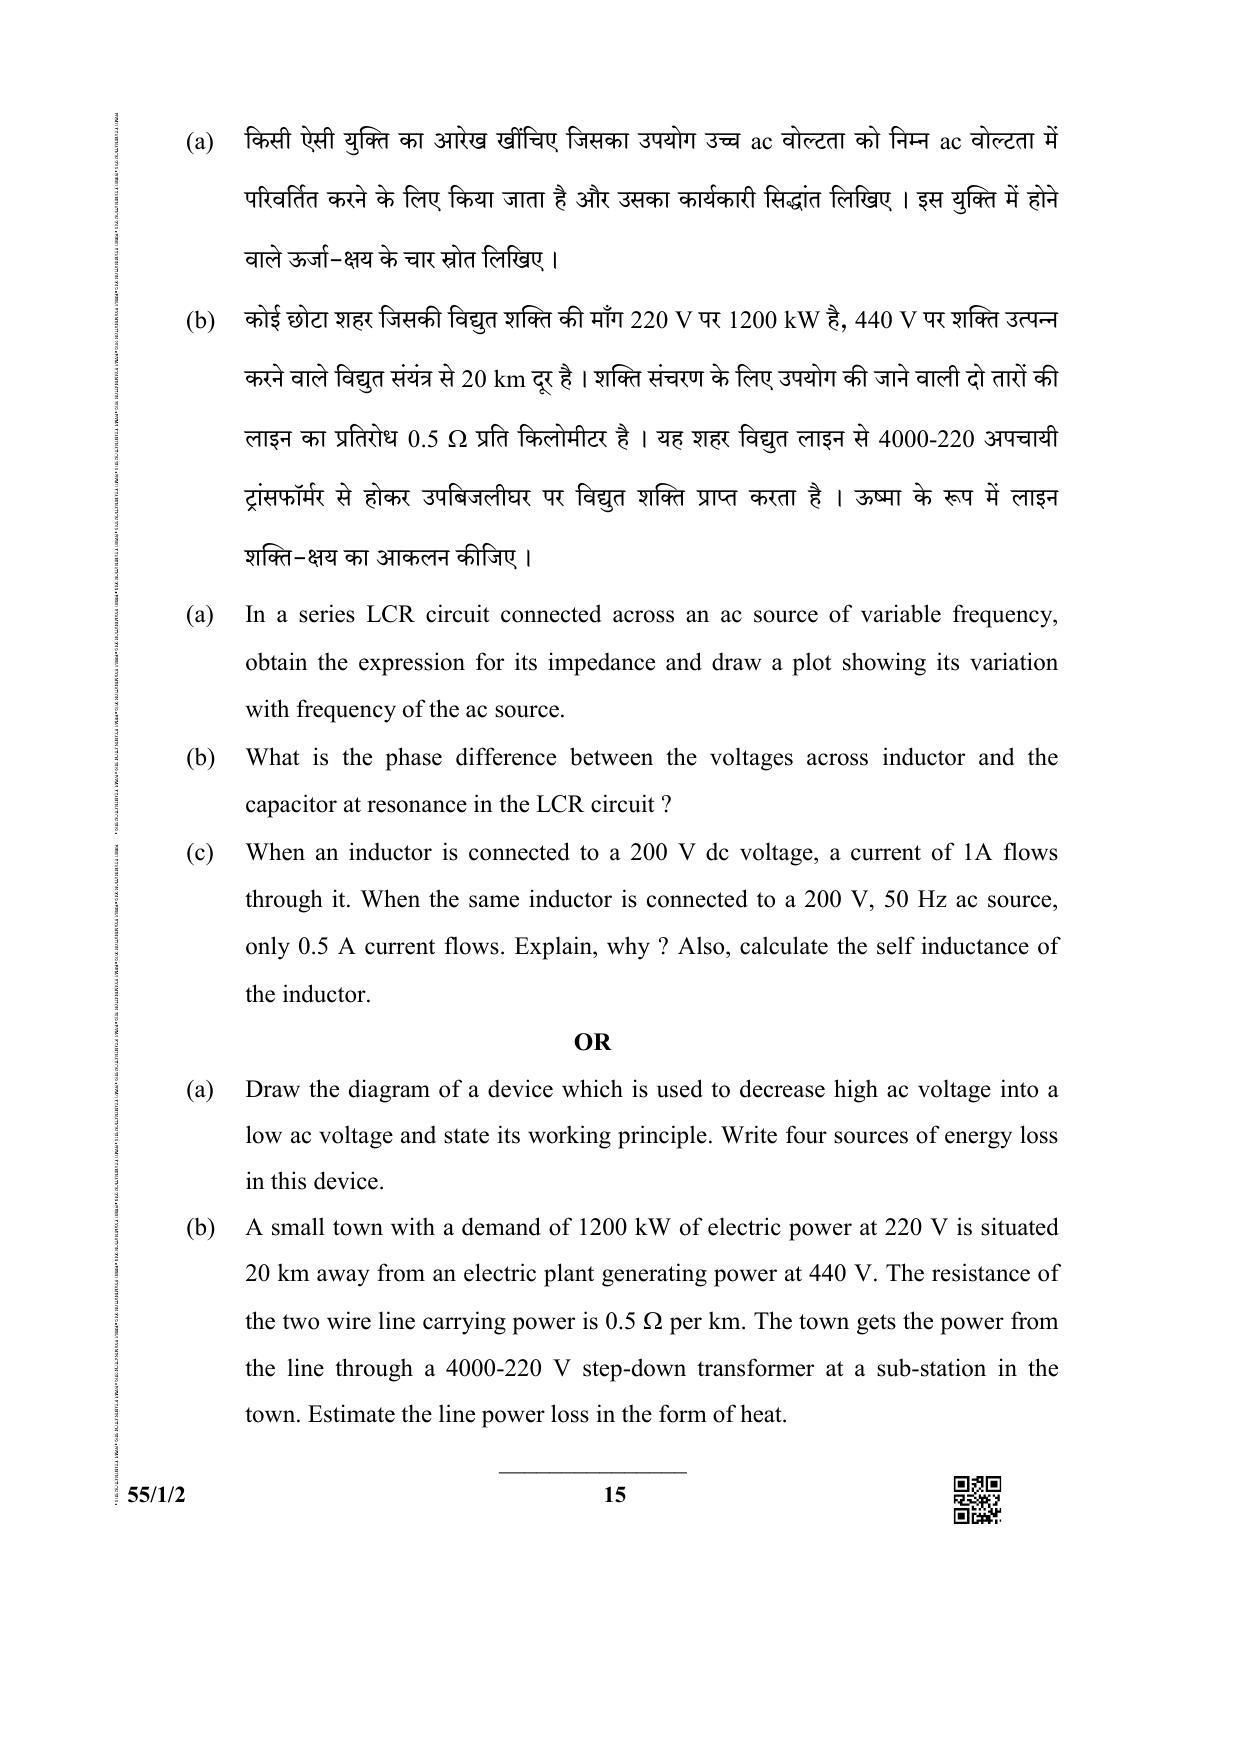 CBSE Class 12 55-1-2 (Physics) 2019 Question Paper - Page 15